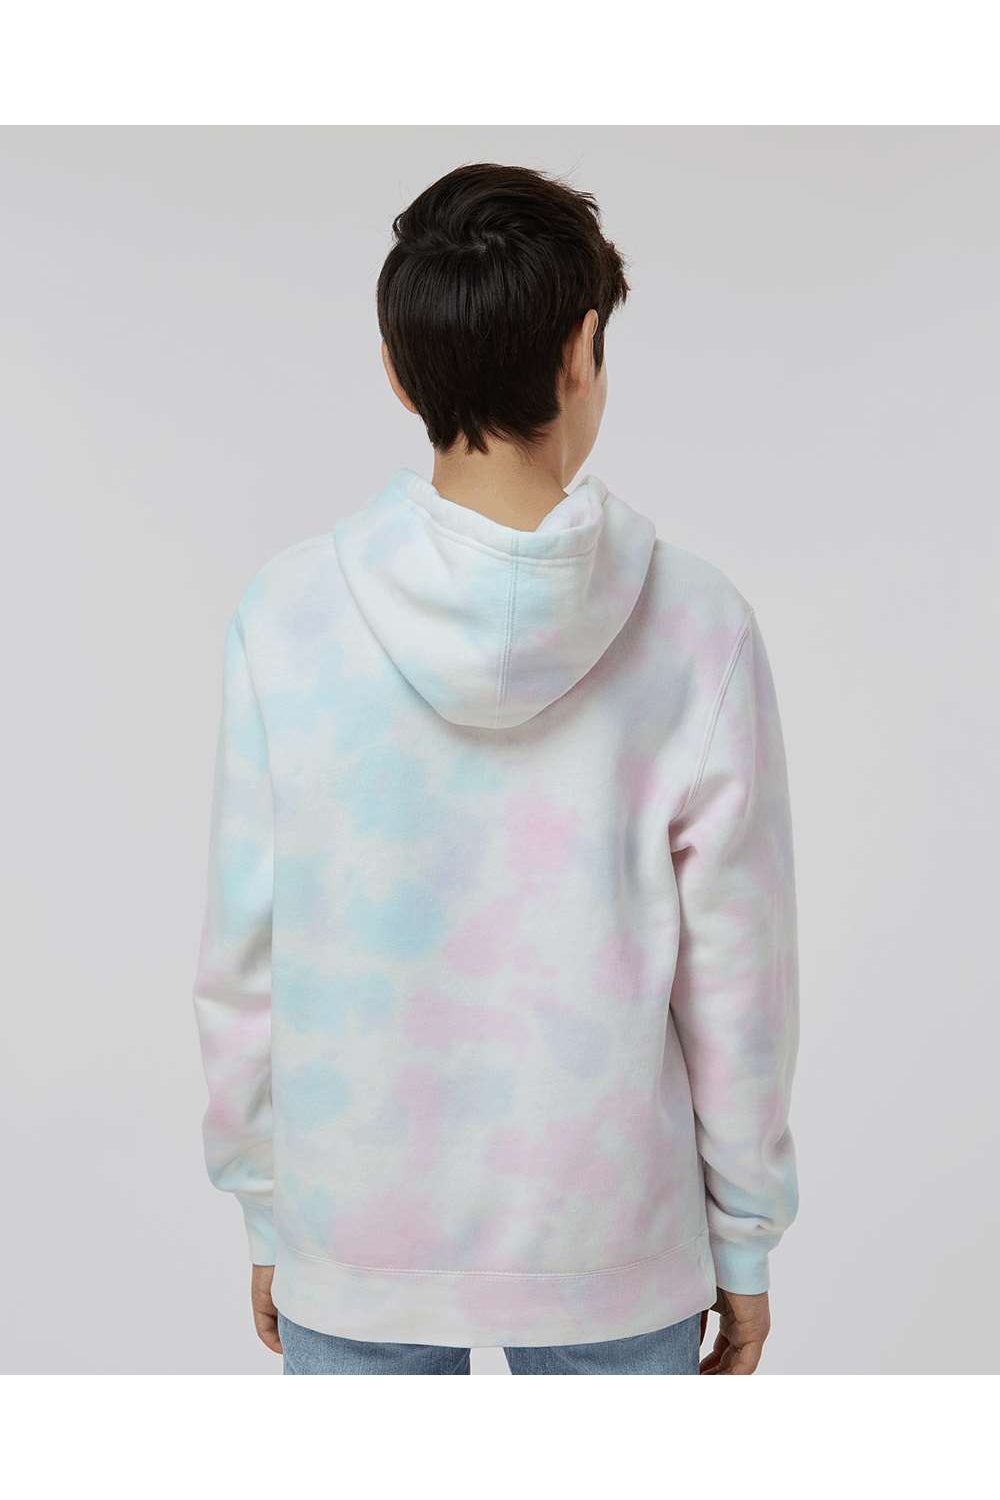 Independent Trading Co. PRM1500TD Youth Tie-Dye Hooded Sweatshirt Hoodie Cotton Candy Model Back